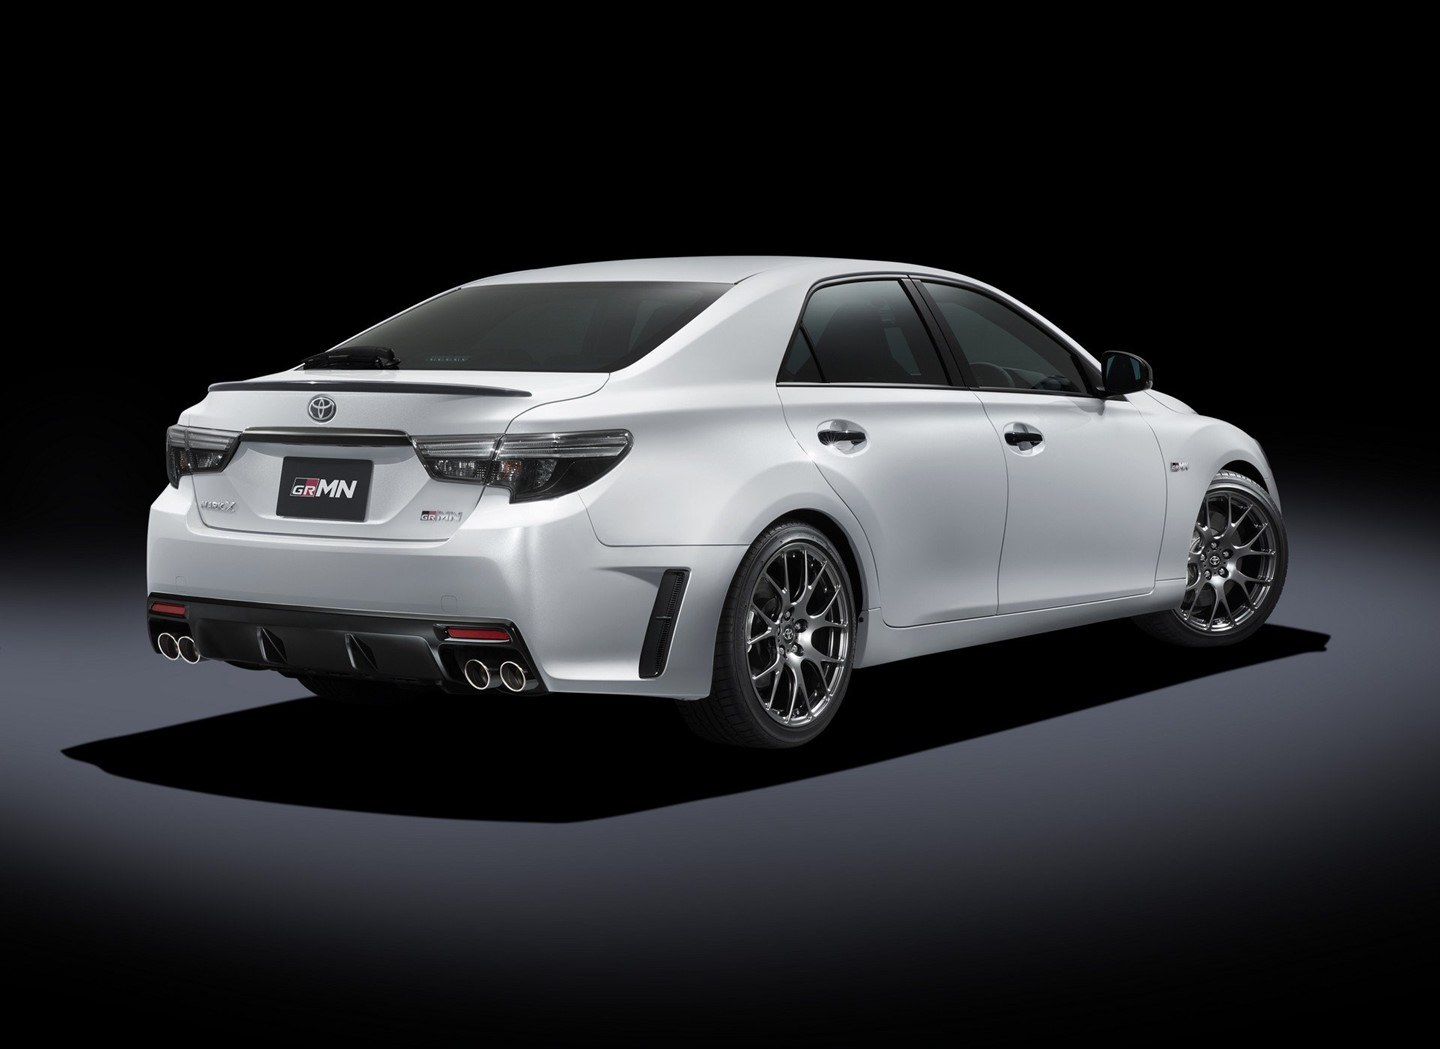 The high-performance version of Toyota Camry priced at $ 50,000 - Blog